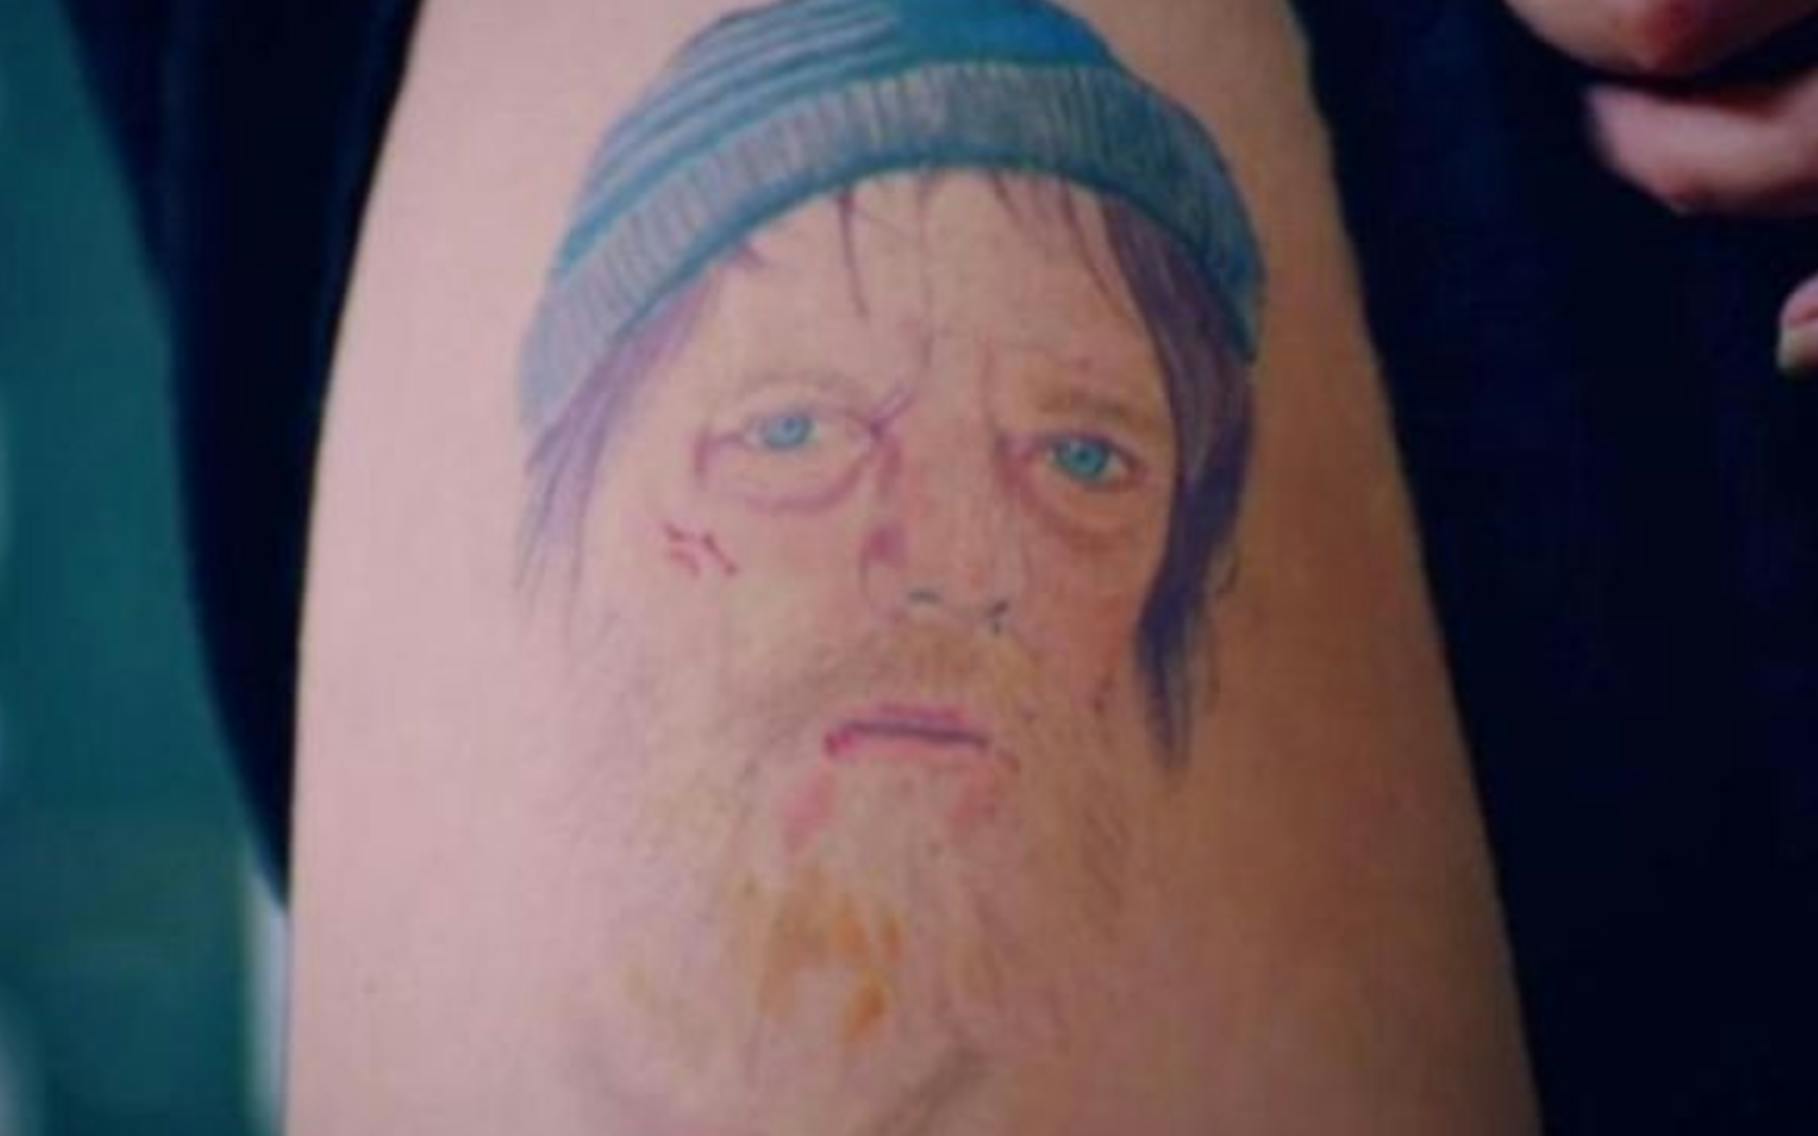 Liam Brindle on Twitter Finally have a close up of Connor Woodss  infamous tattoo Ian Brown  Frank Gallagher  Pete Molyneux  Jesus  httptcoh4GQ36Bgf5  Twitter